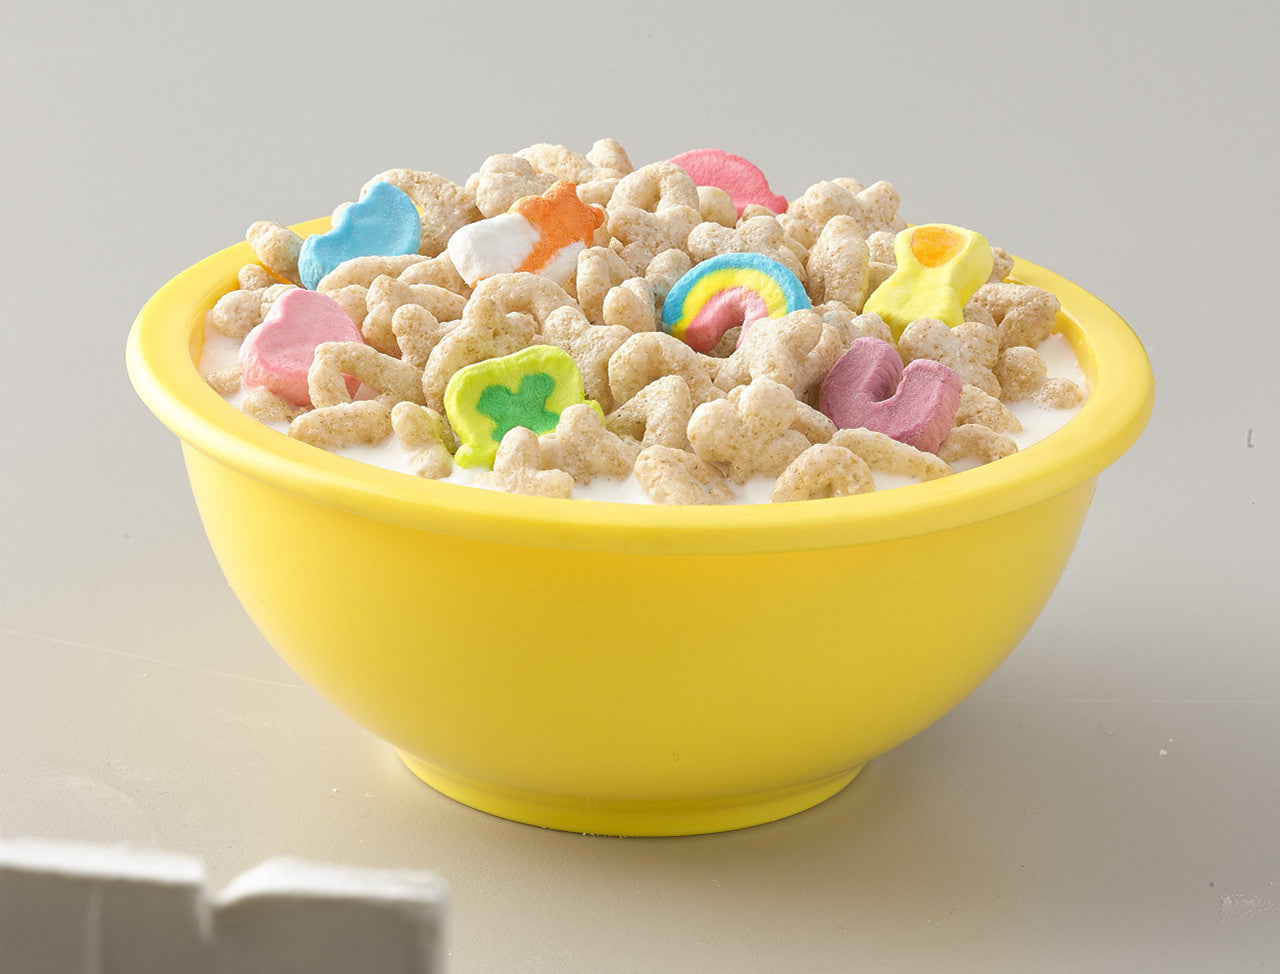 General Mills Lucky Charms Breakfast Cereal with Marshmallows, Whole Grains  - 300 g